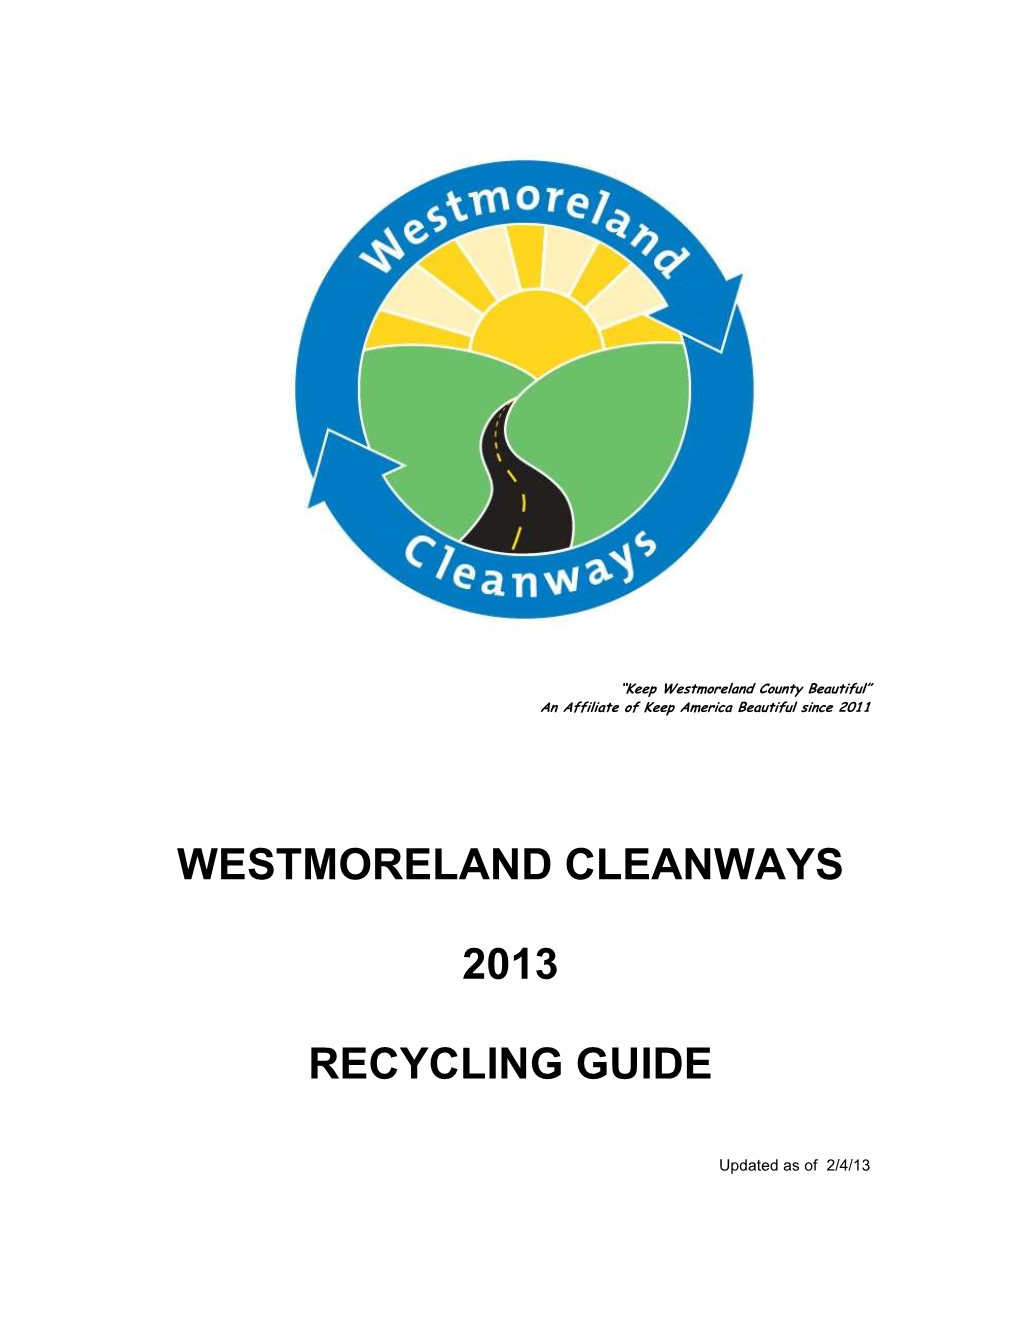 Westmoreland Cleanways 2013 Recycling Guide